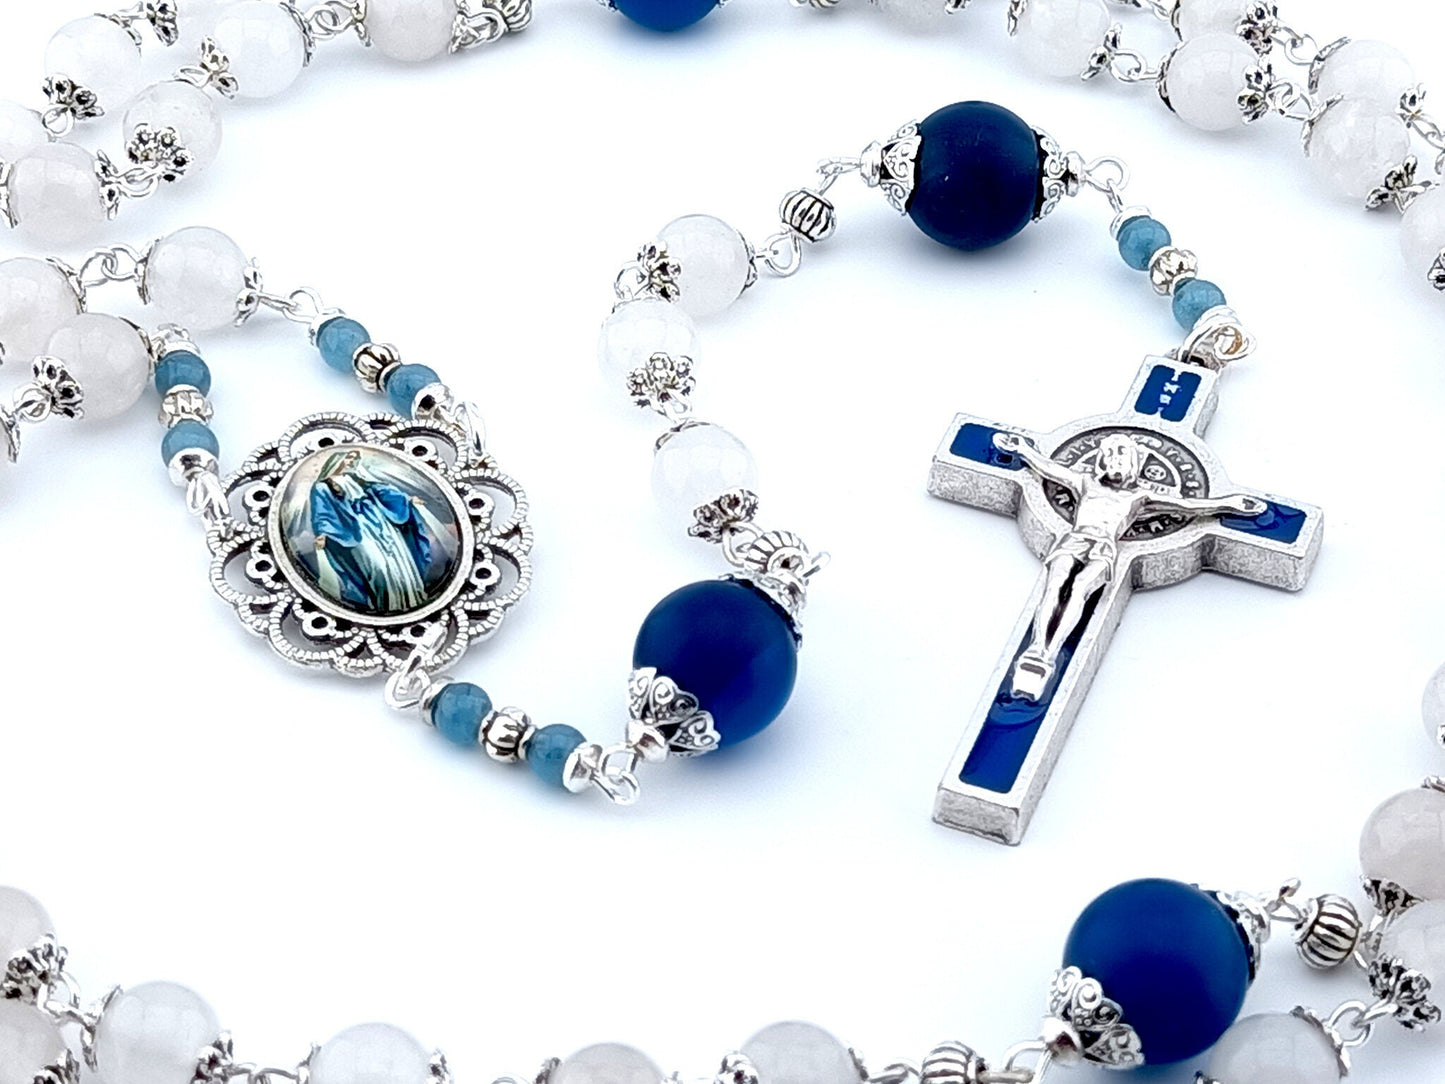 Our Lady of Grace unique rosary beads with opal and blue agate gemstone beads, blue enamel Saint Benedict crucifix, silver bead caps and picture centre medal.